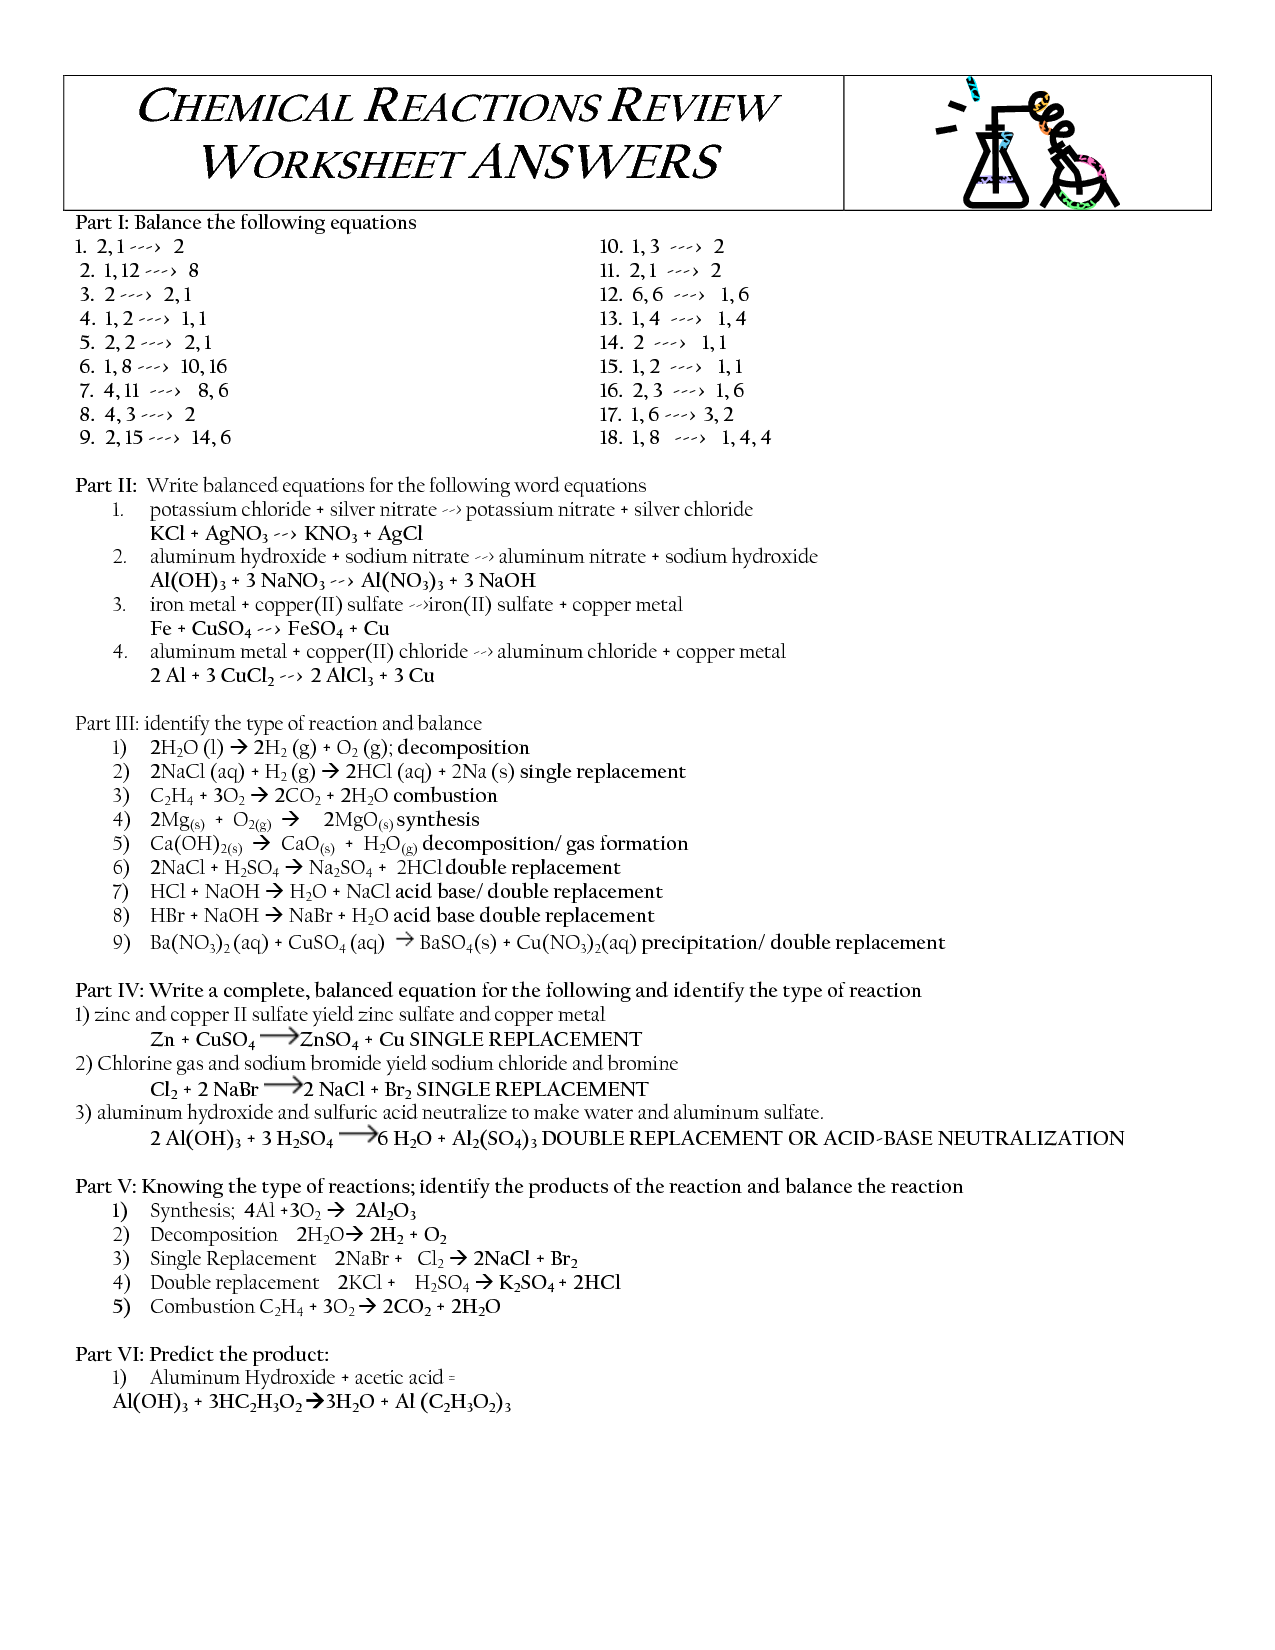 12 Best Images of Physical And Chemical Reactions Worksheet - Physical